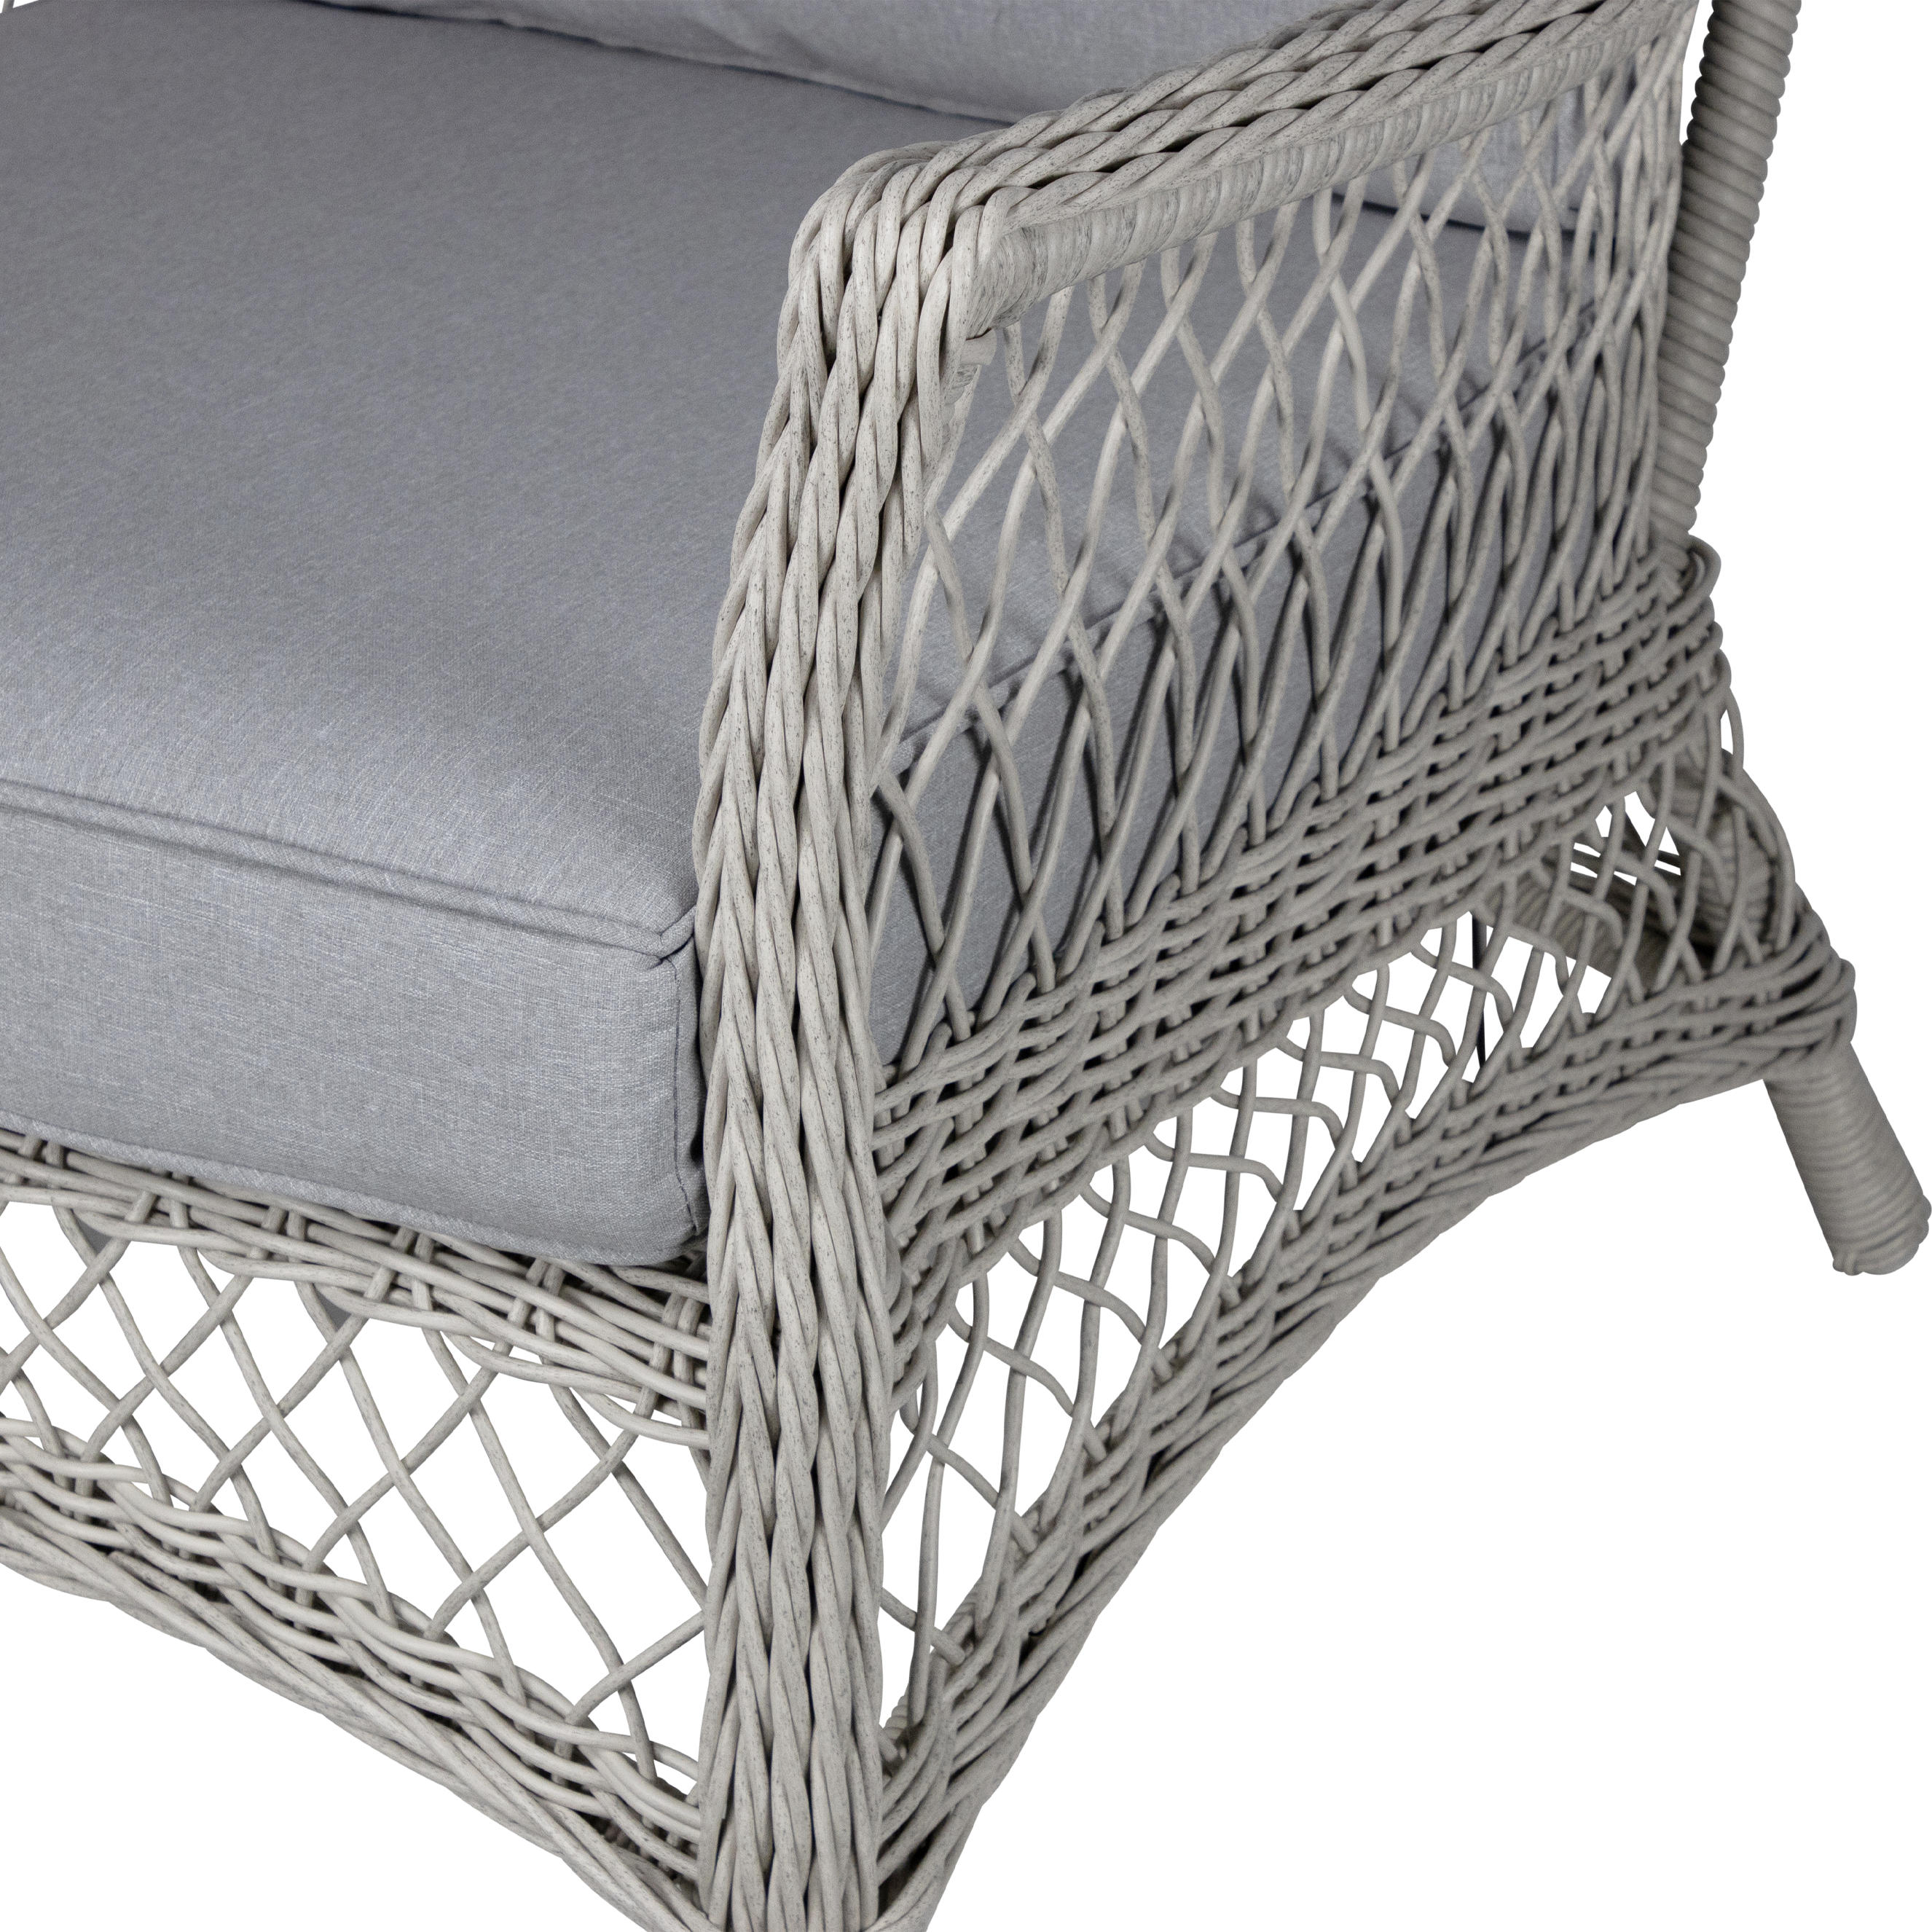 Hamptons 3 Seater in Surfmist Wicker and Dune Spunpoly Cushions